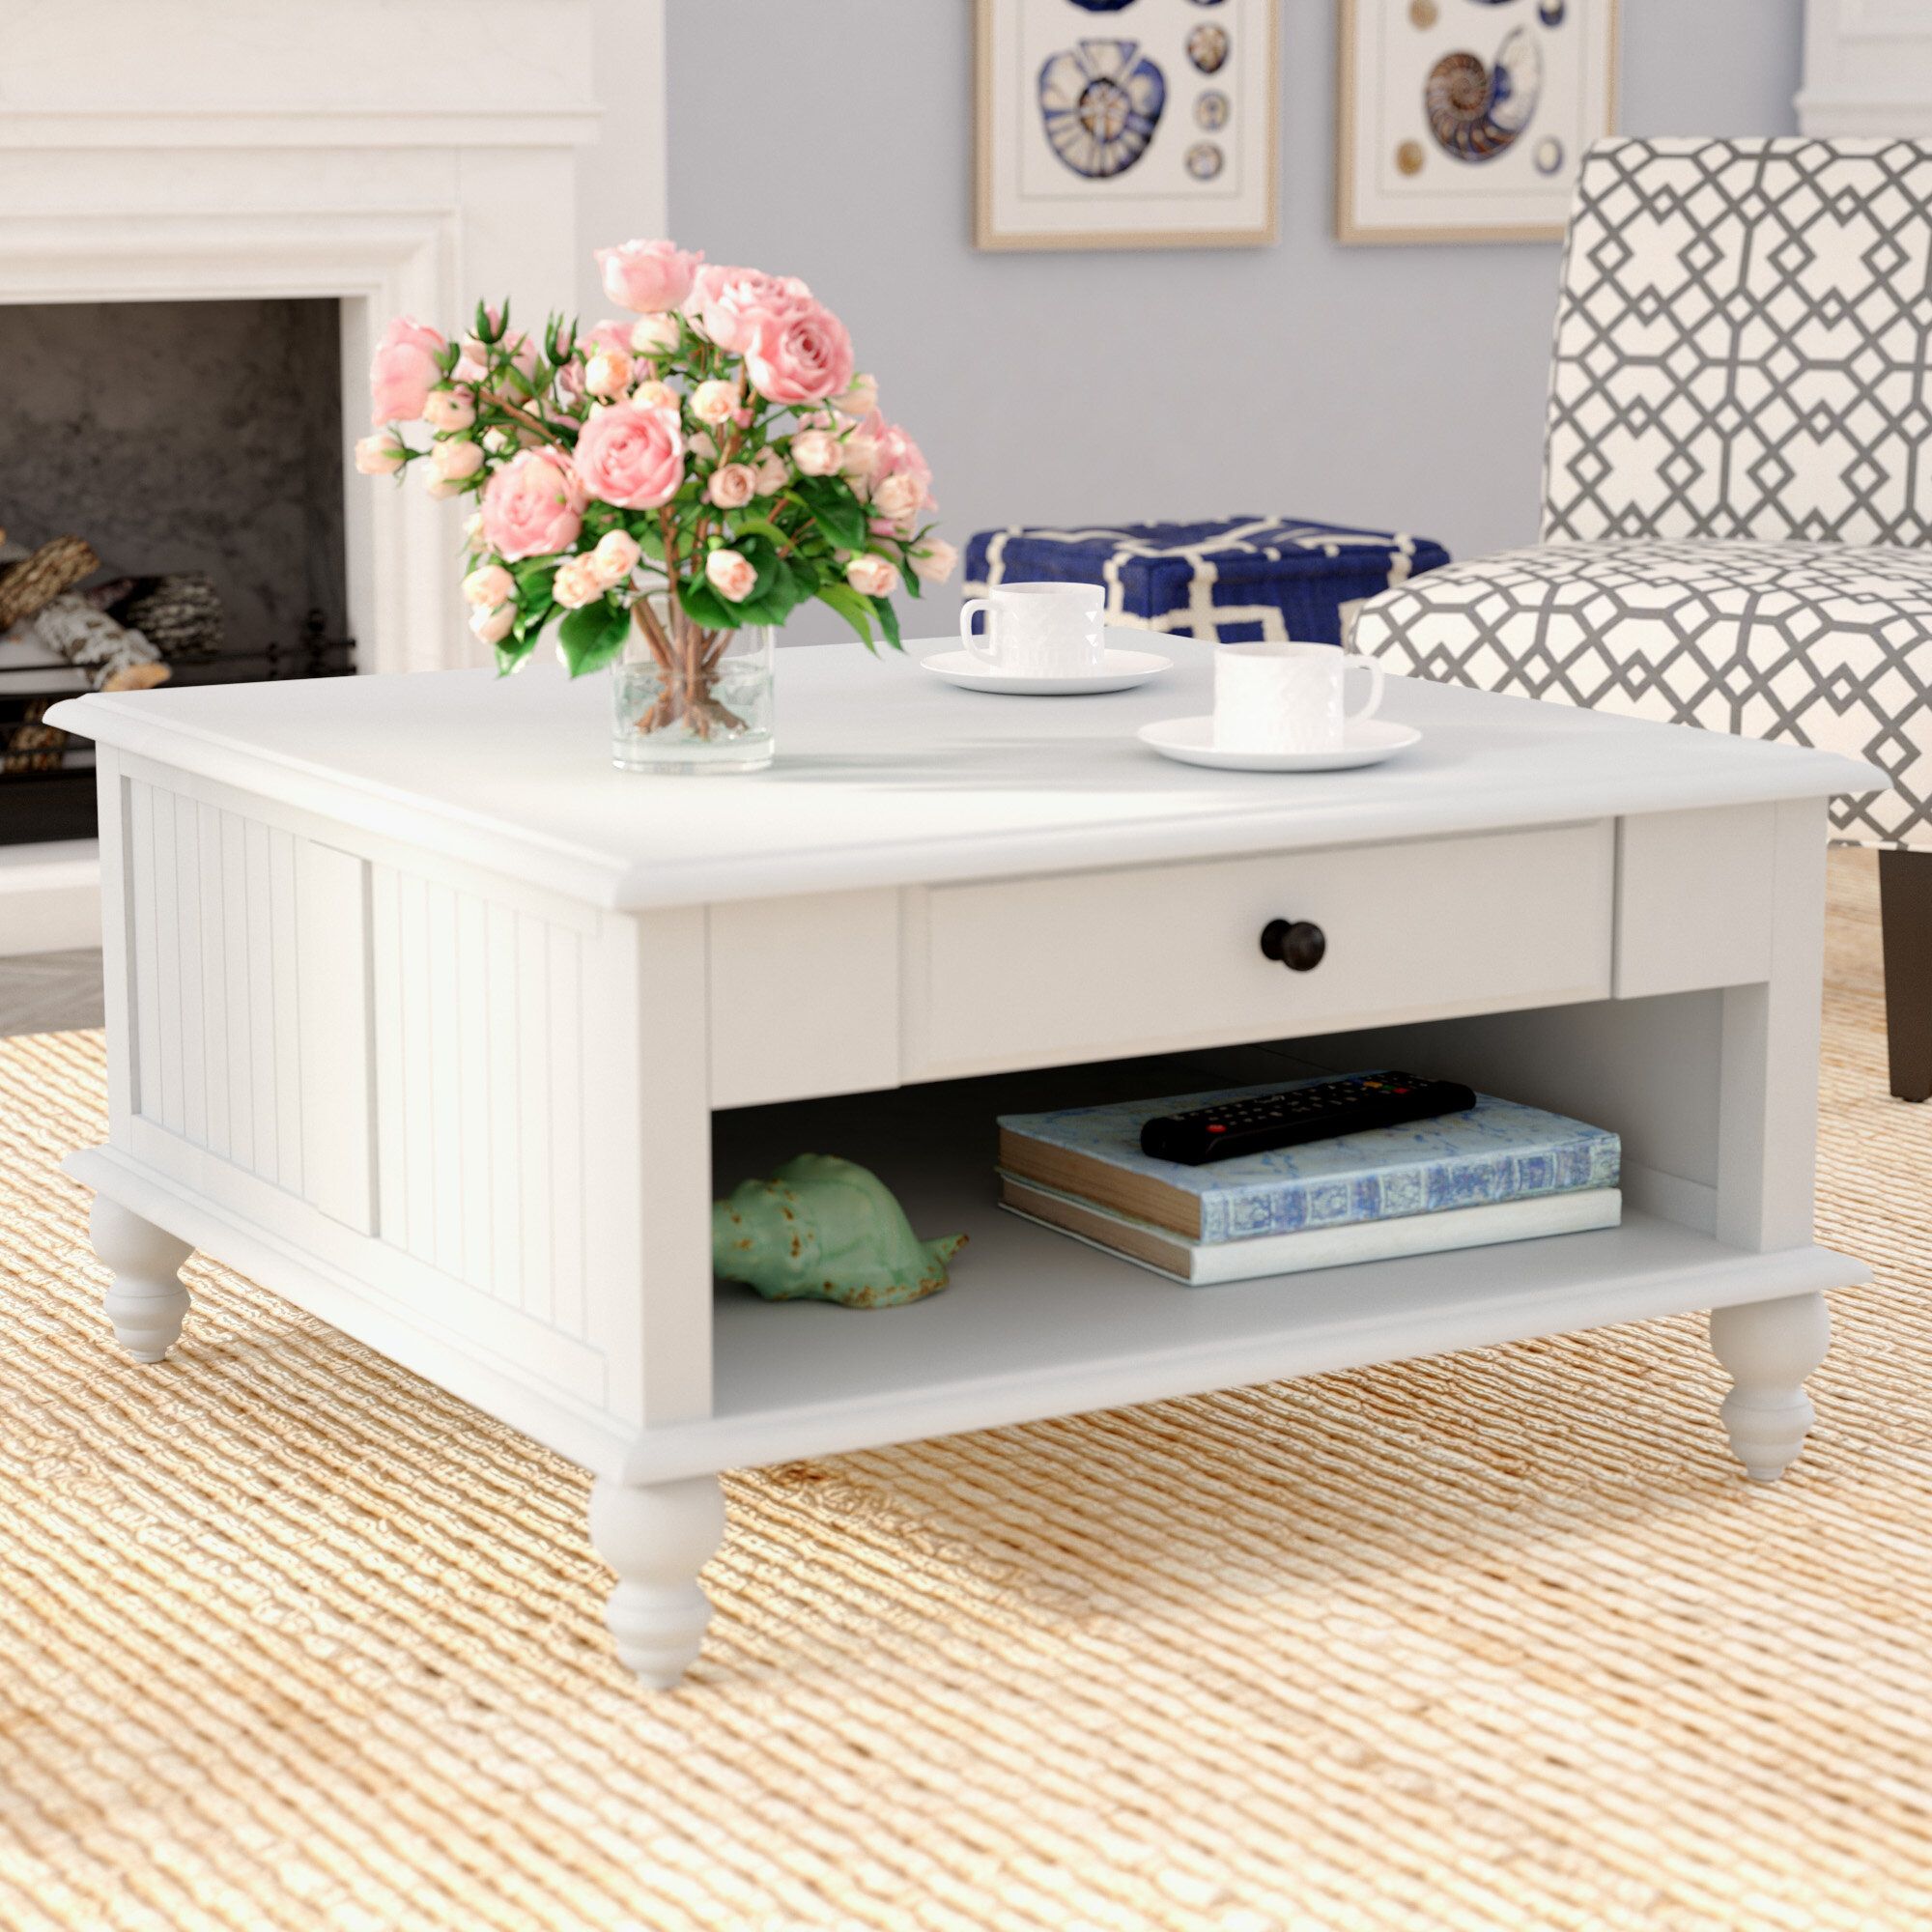 Rosecliff Heights Witherspoon Coffee Table With Storage & Reviews | Wayfair With White Storage Coffee Tables (View 2 of 20)